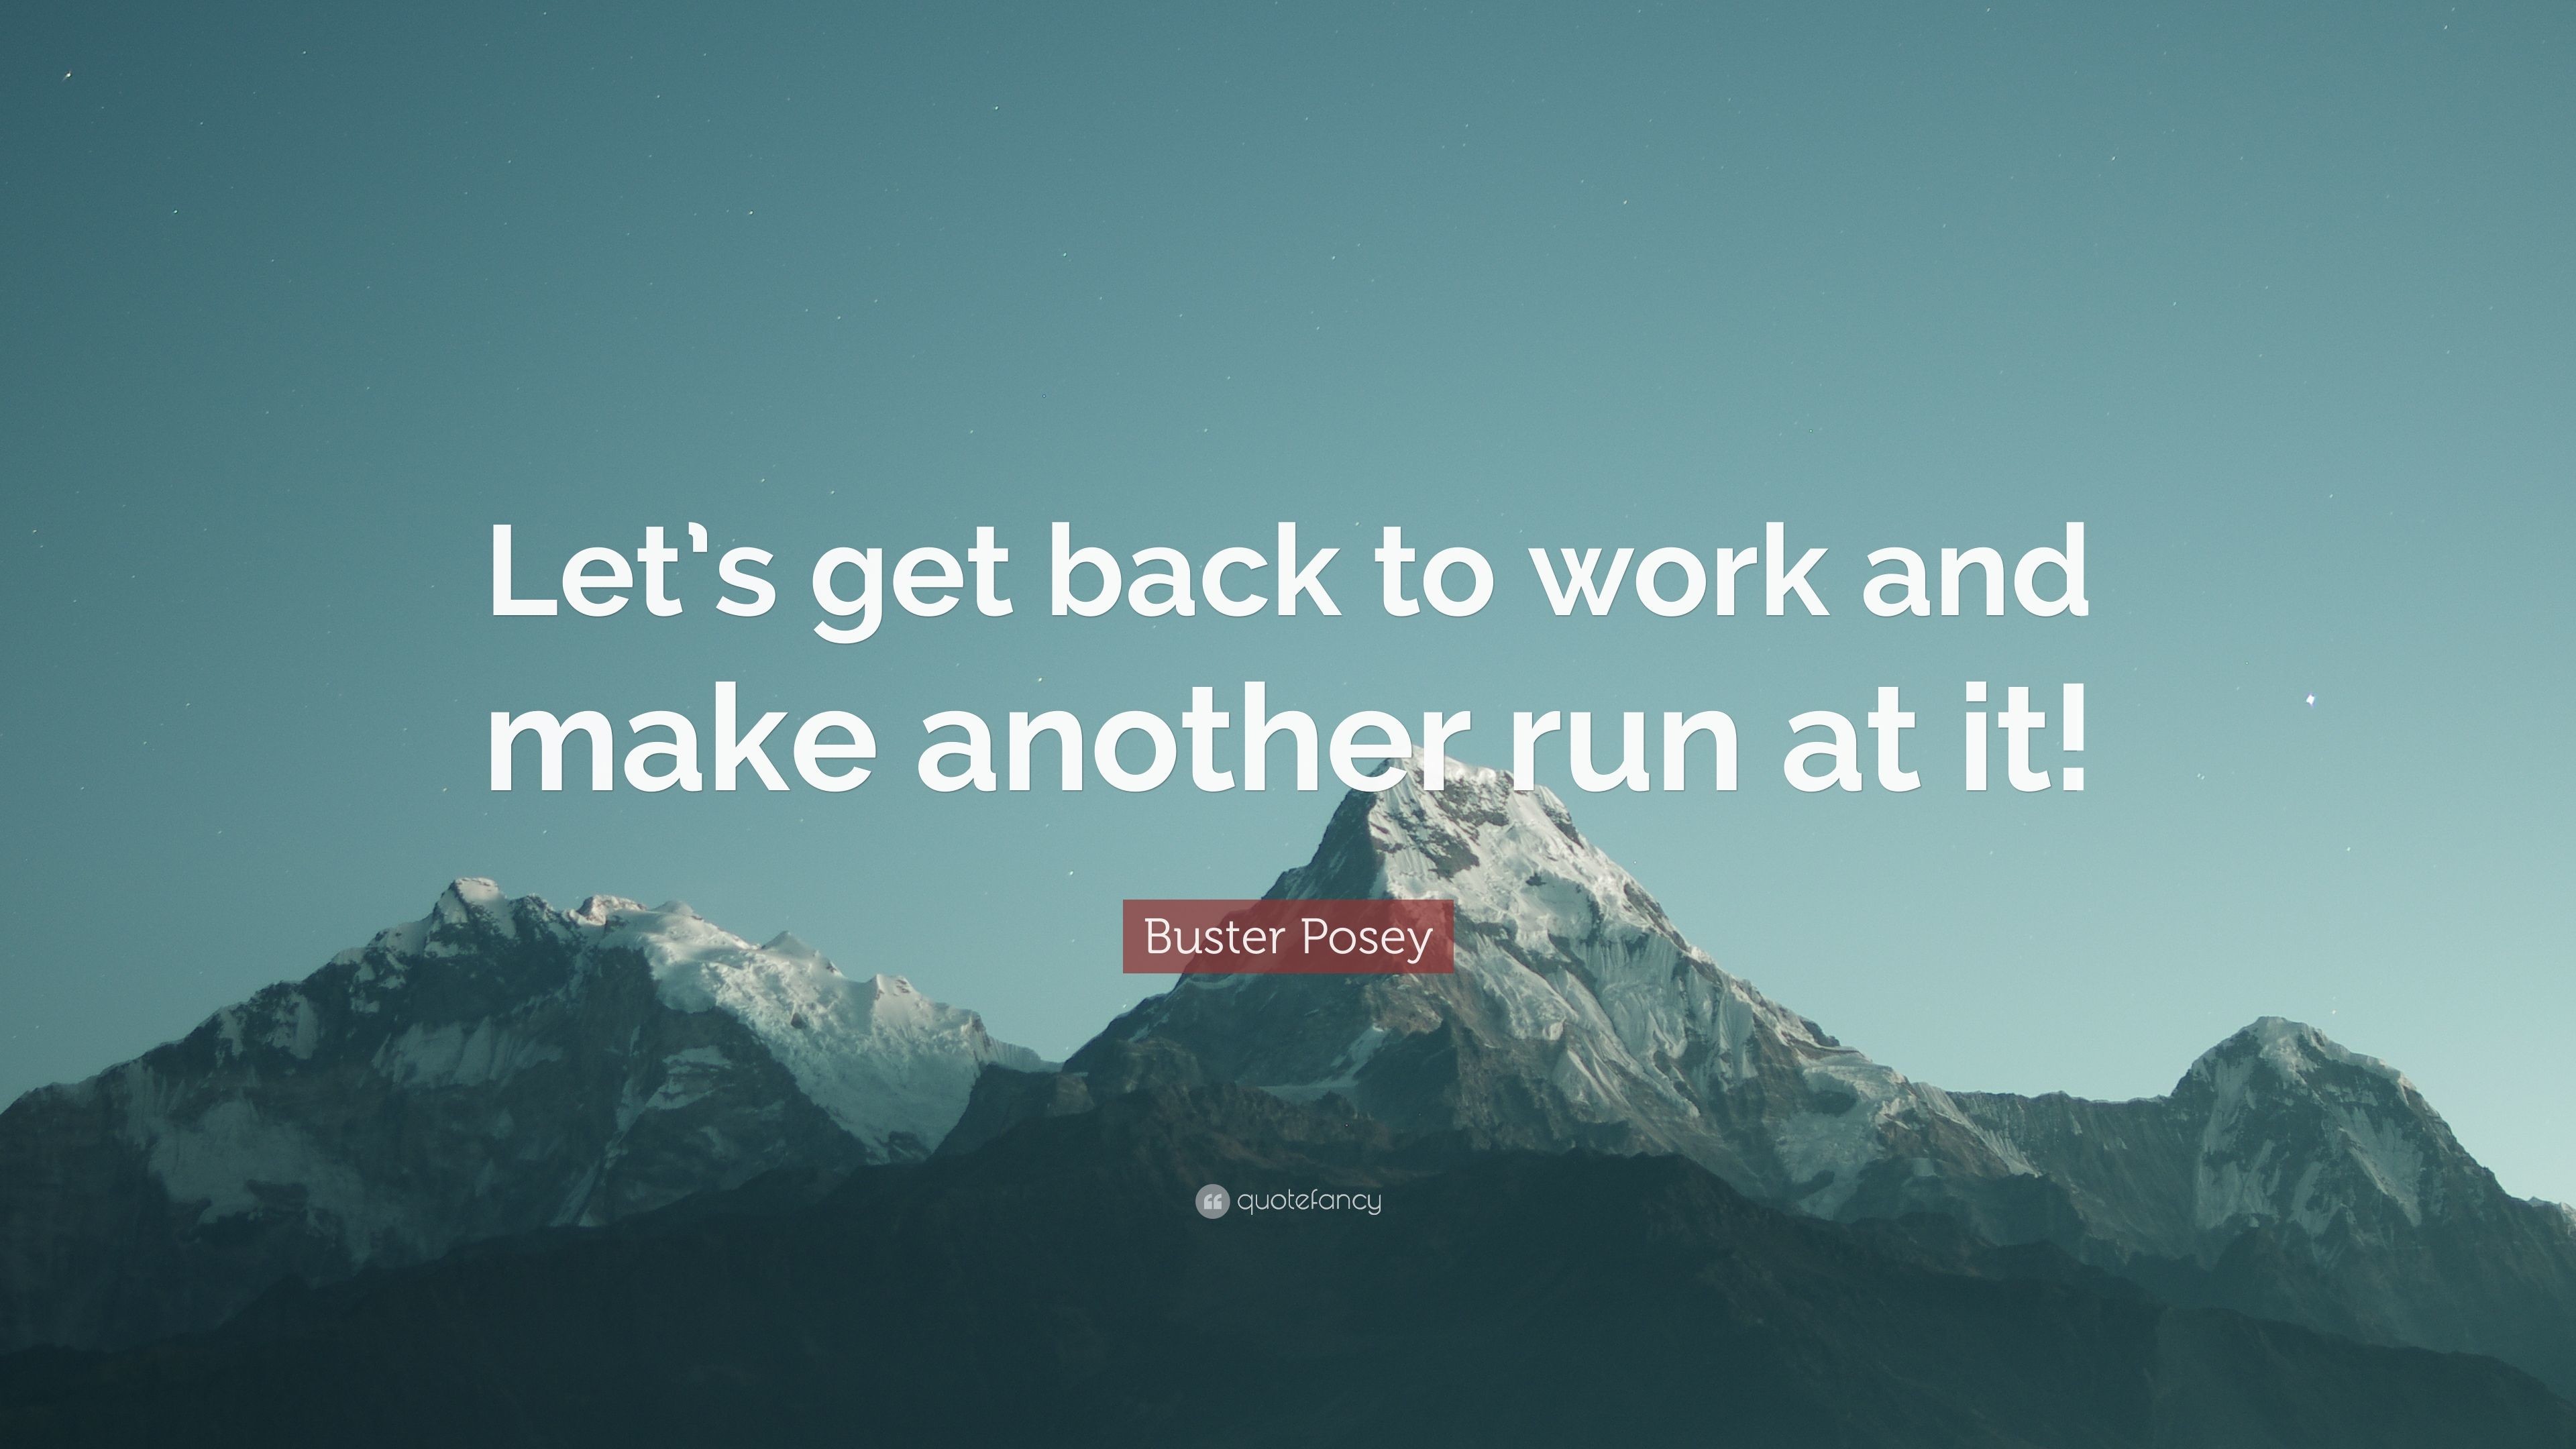 Buster Posey Quote Lets get back to work and make another run at it